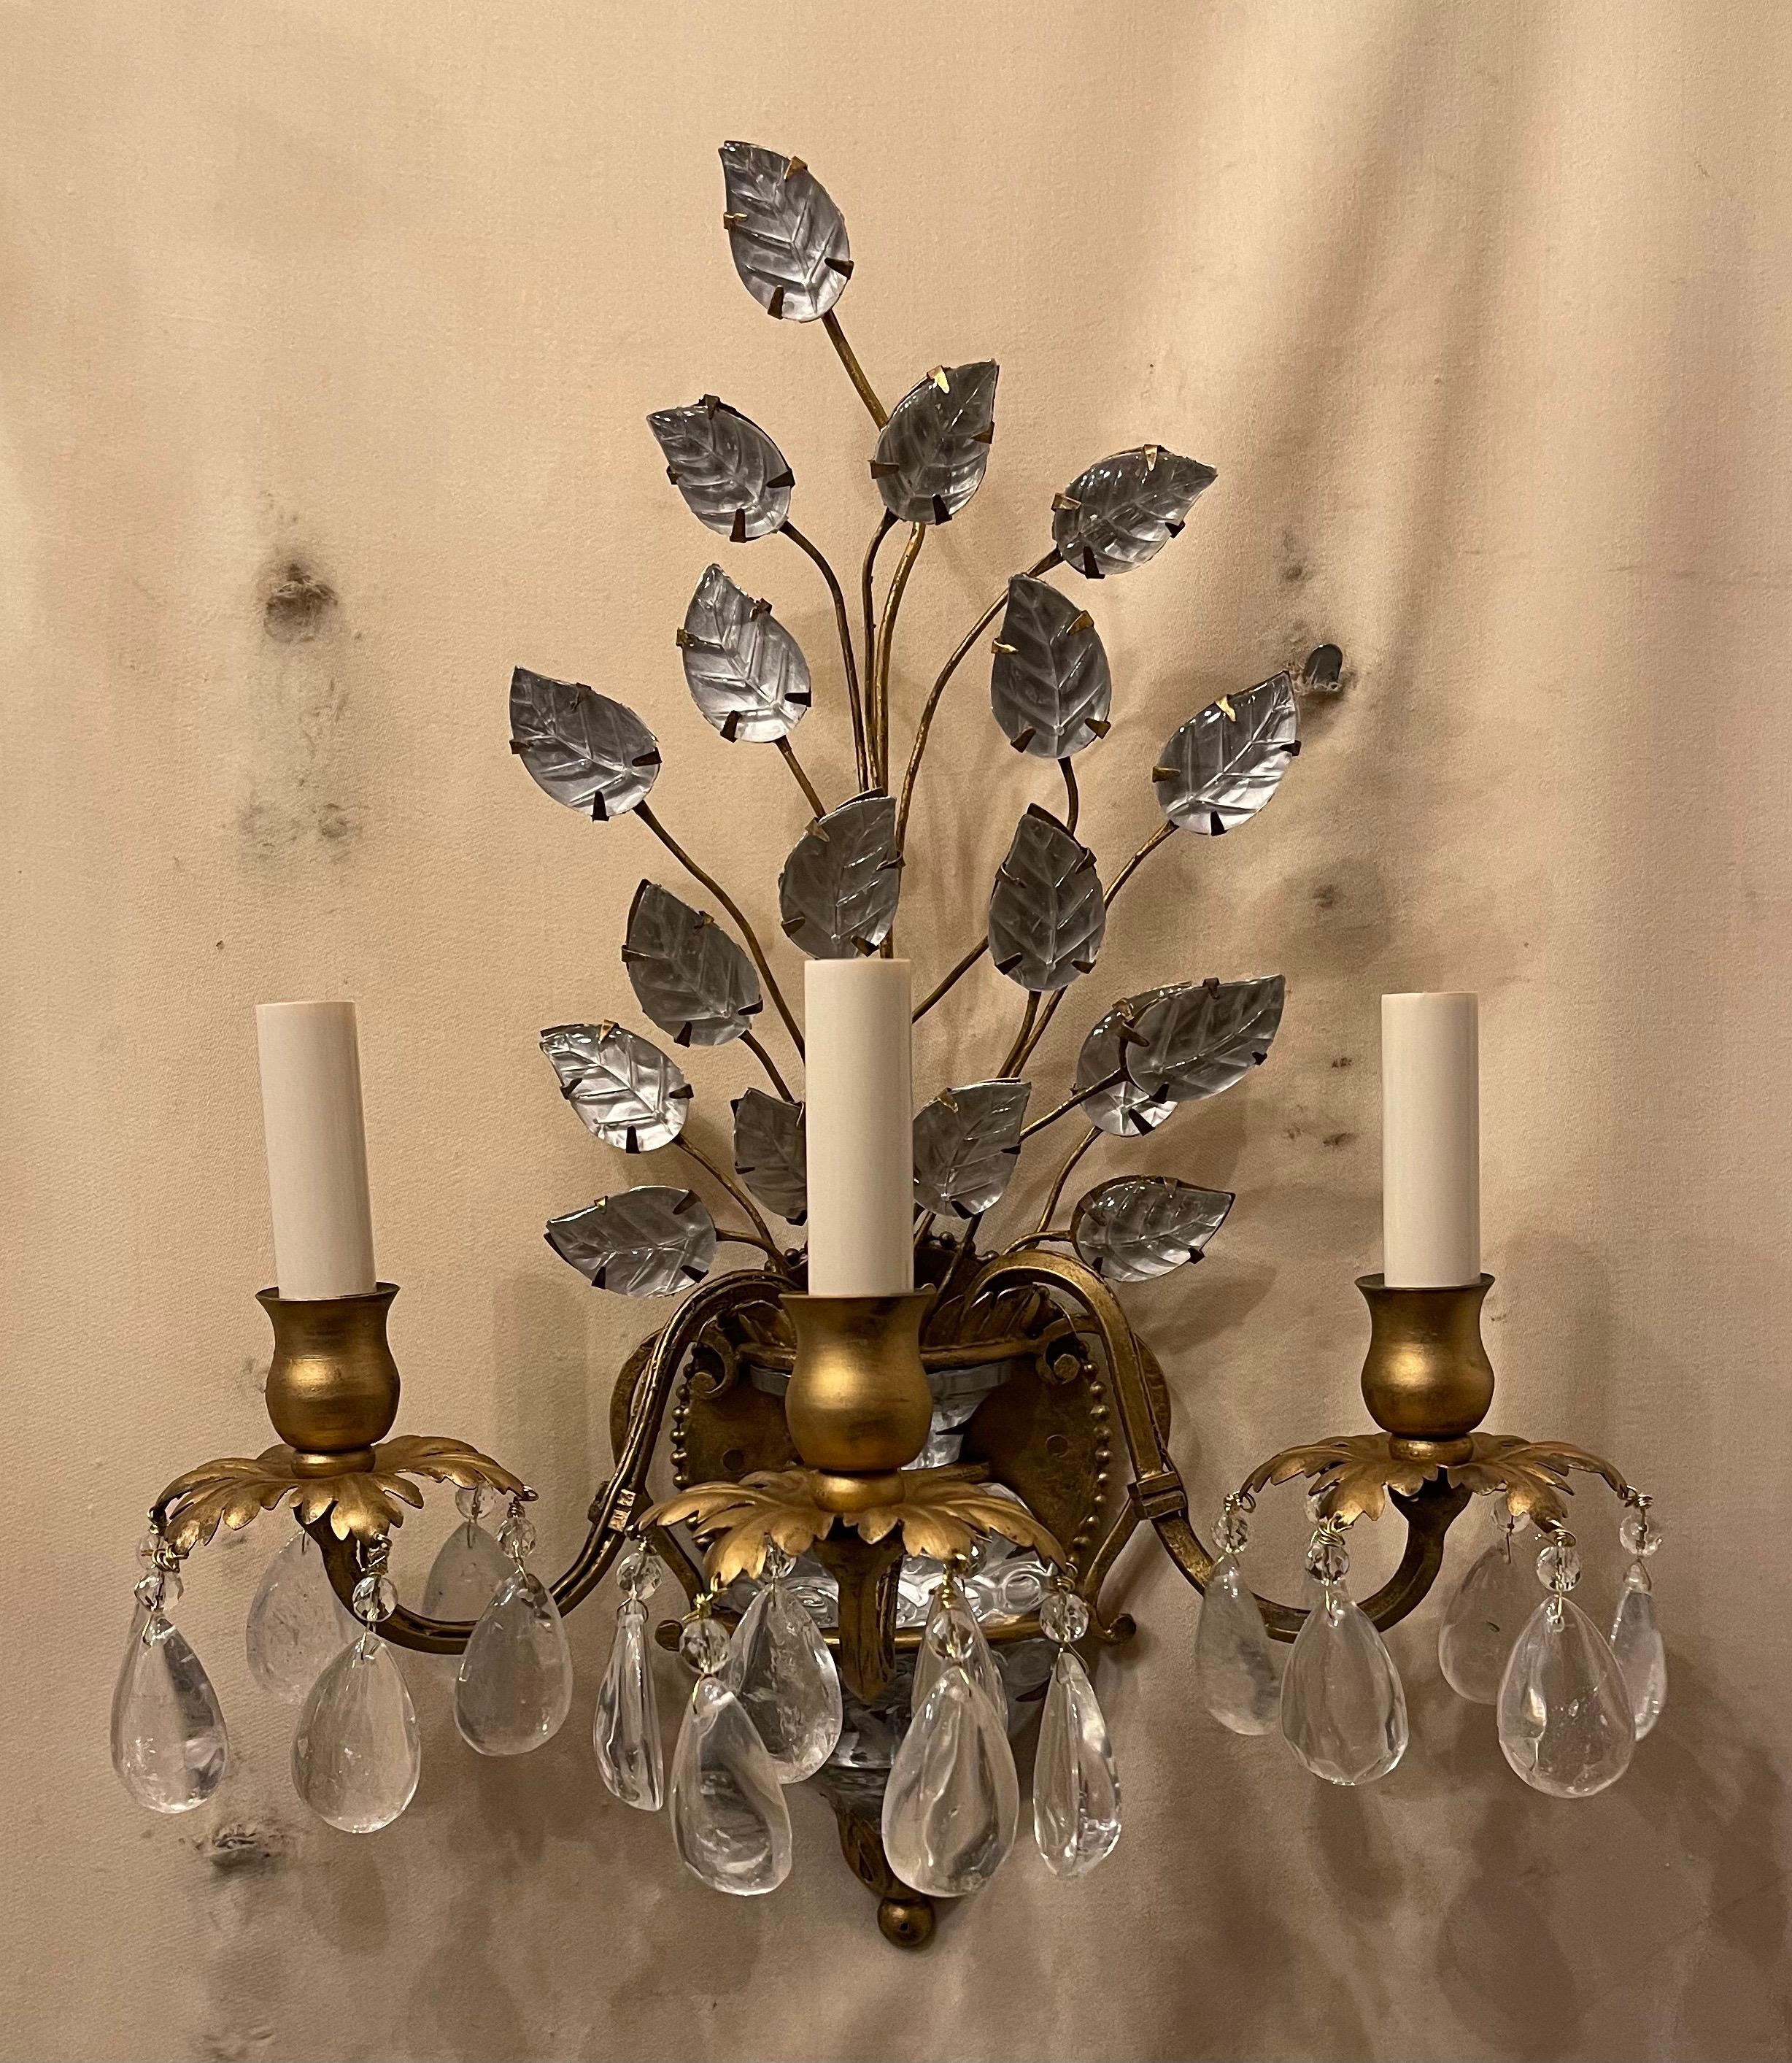 A wonderful pair of vintage French gold gilt rock crystal drop and faux urn sconces having a lovely leaf spray bouquet, each with 3 candelabra lights, rewired and ready to install with mounting hardware.